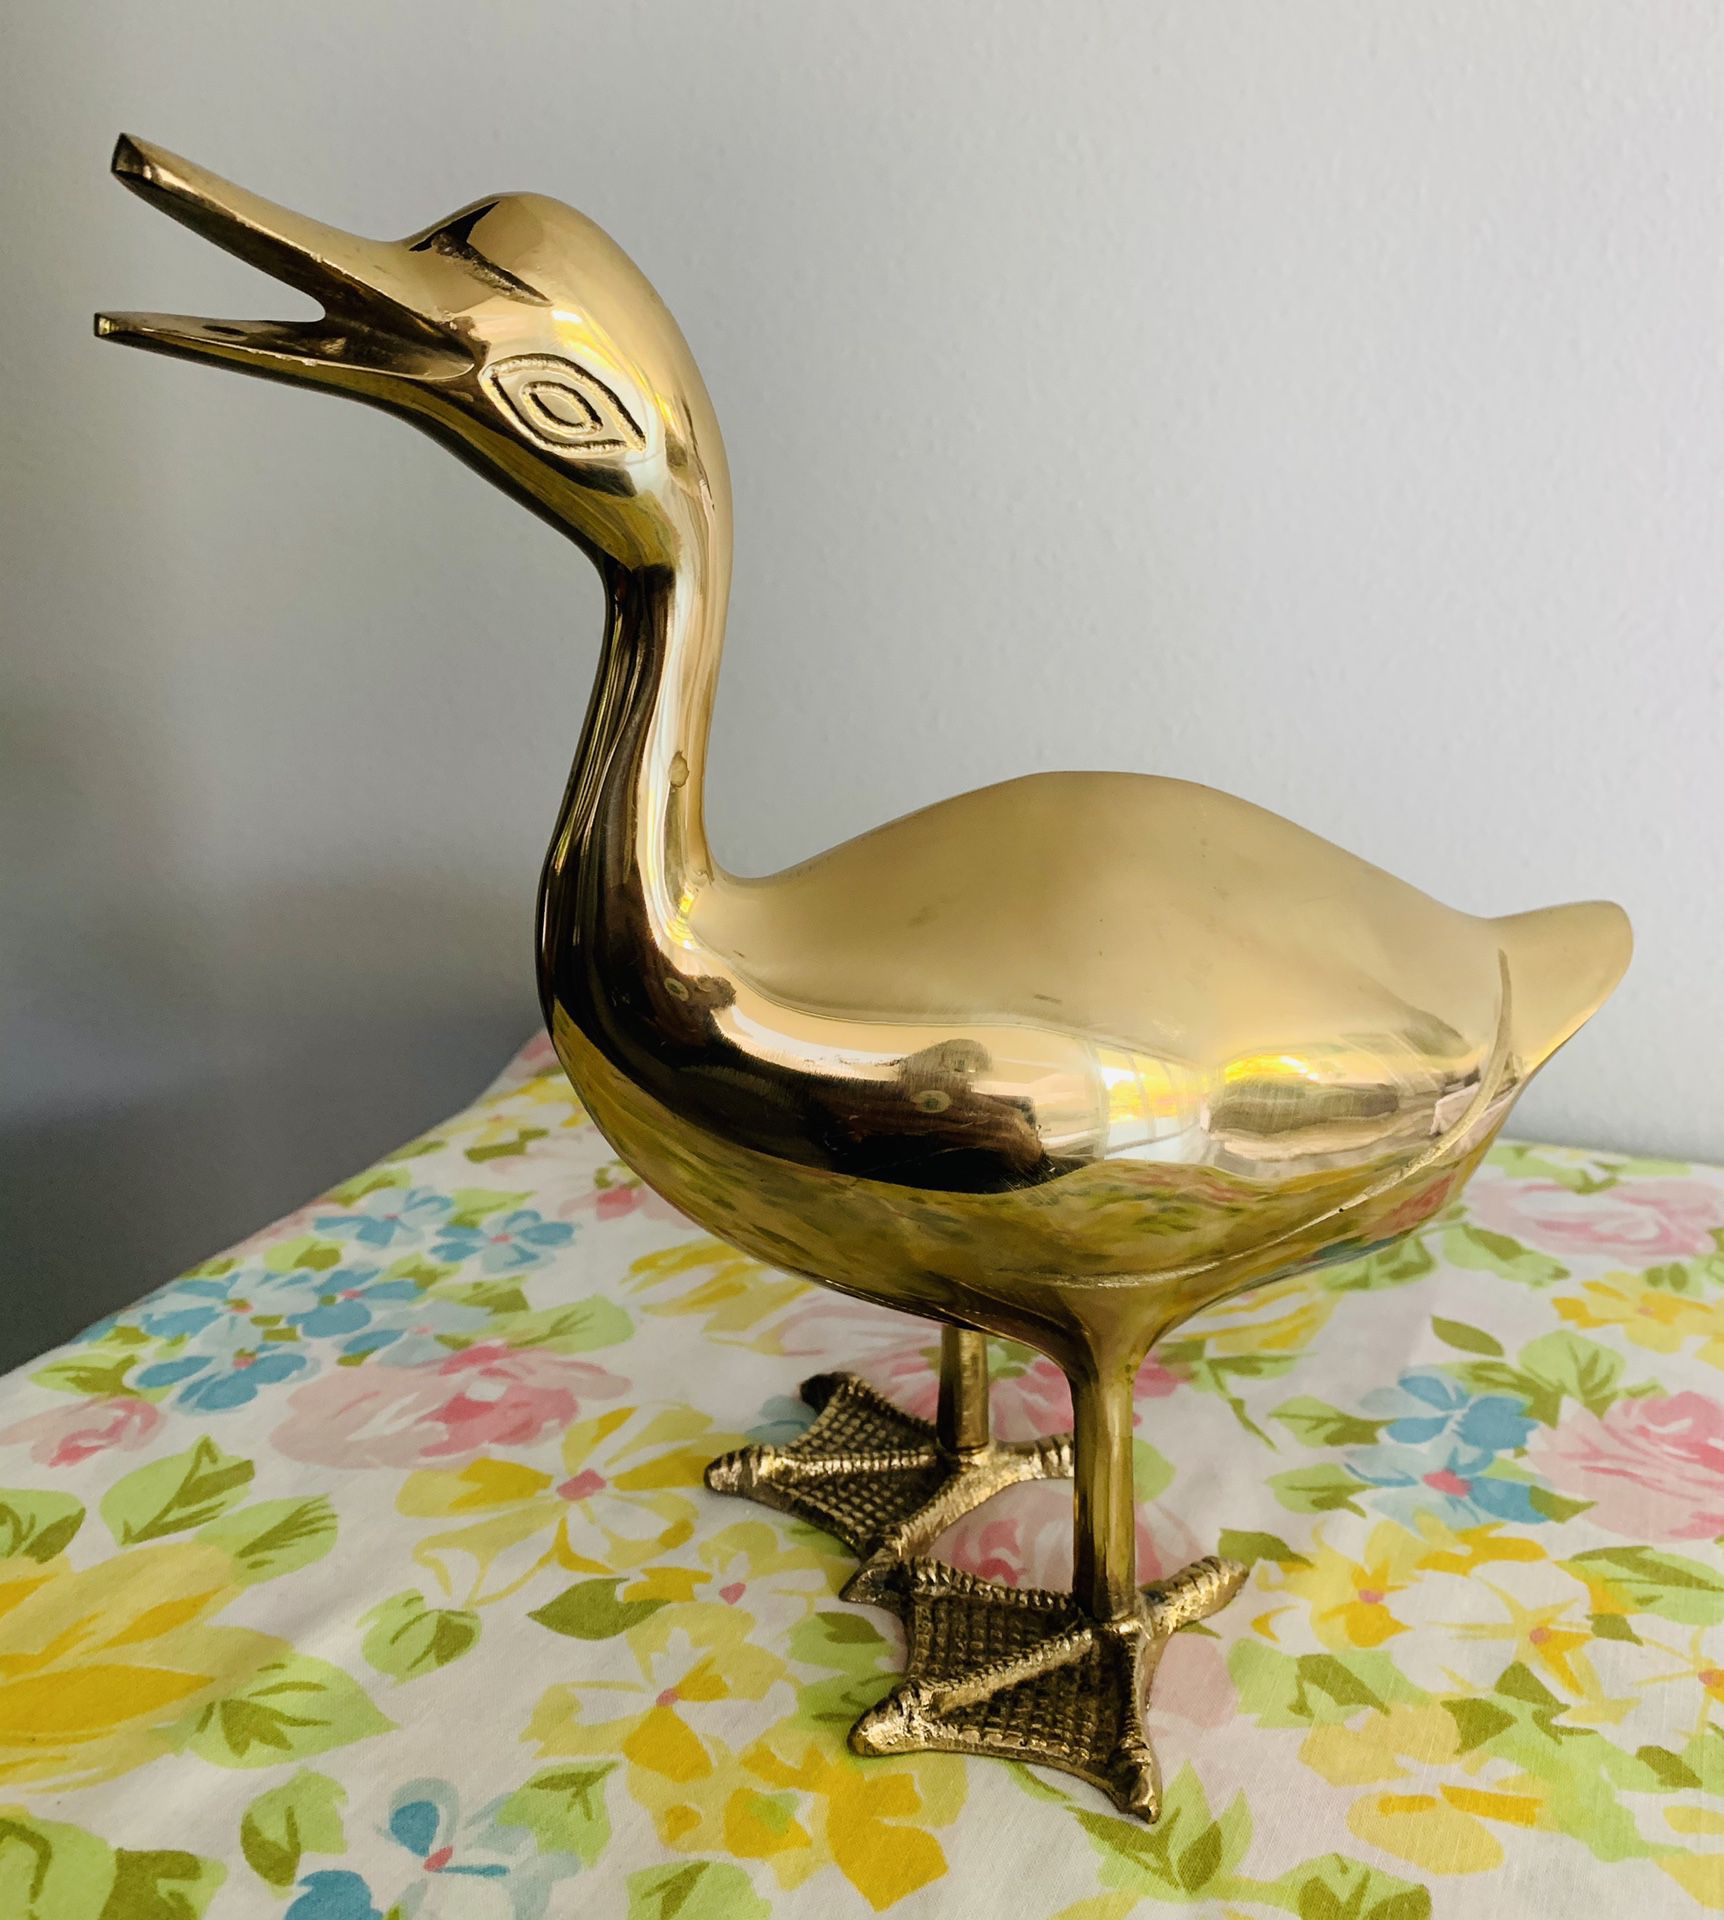 Vintage solid brass duck. Original sticker intact says Gatco solid brass made in Korea. Very nice condition Large 9” tall x 10 1/2” wide  